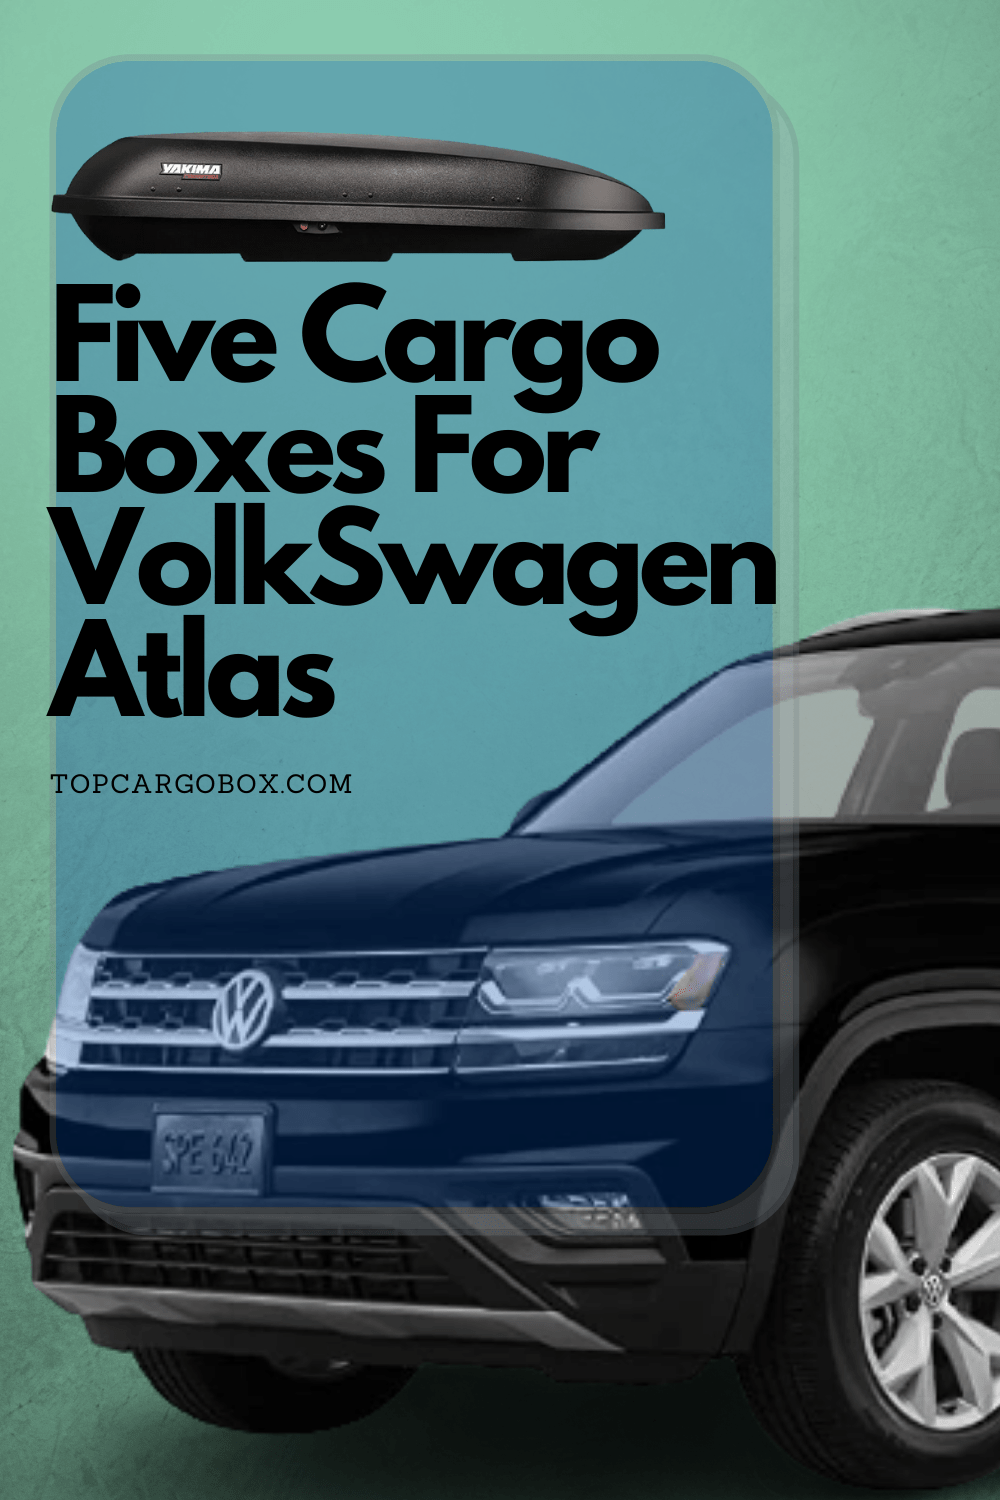 Finding cargo boxes for Volkswagen Atlas is not that challenging, and you can use this article to locate a suitable roof box in mintues for your family and your vehicle.